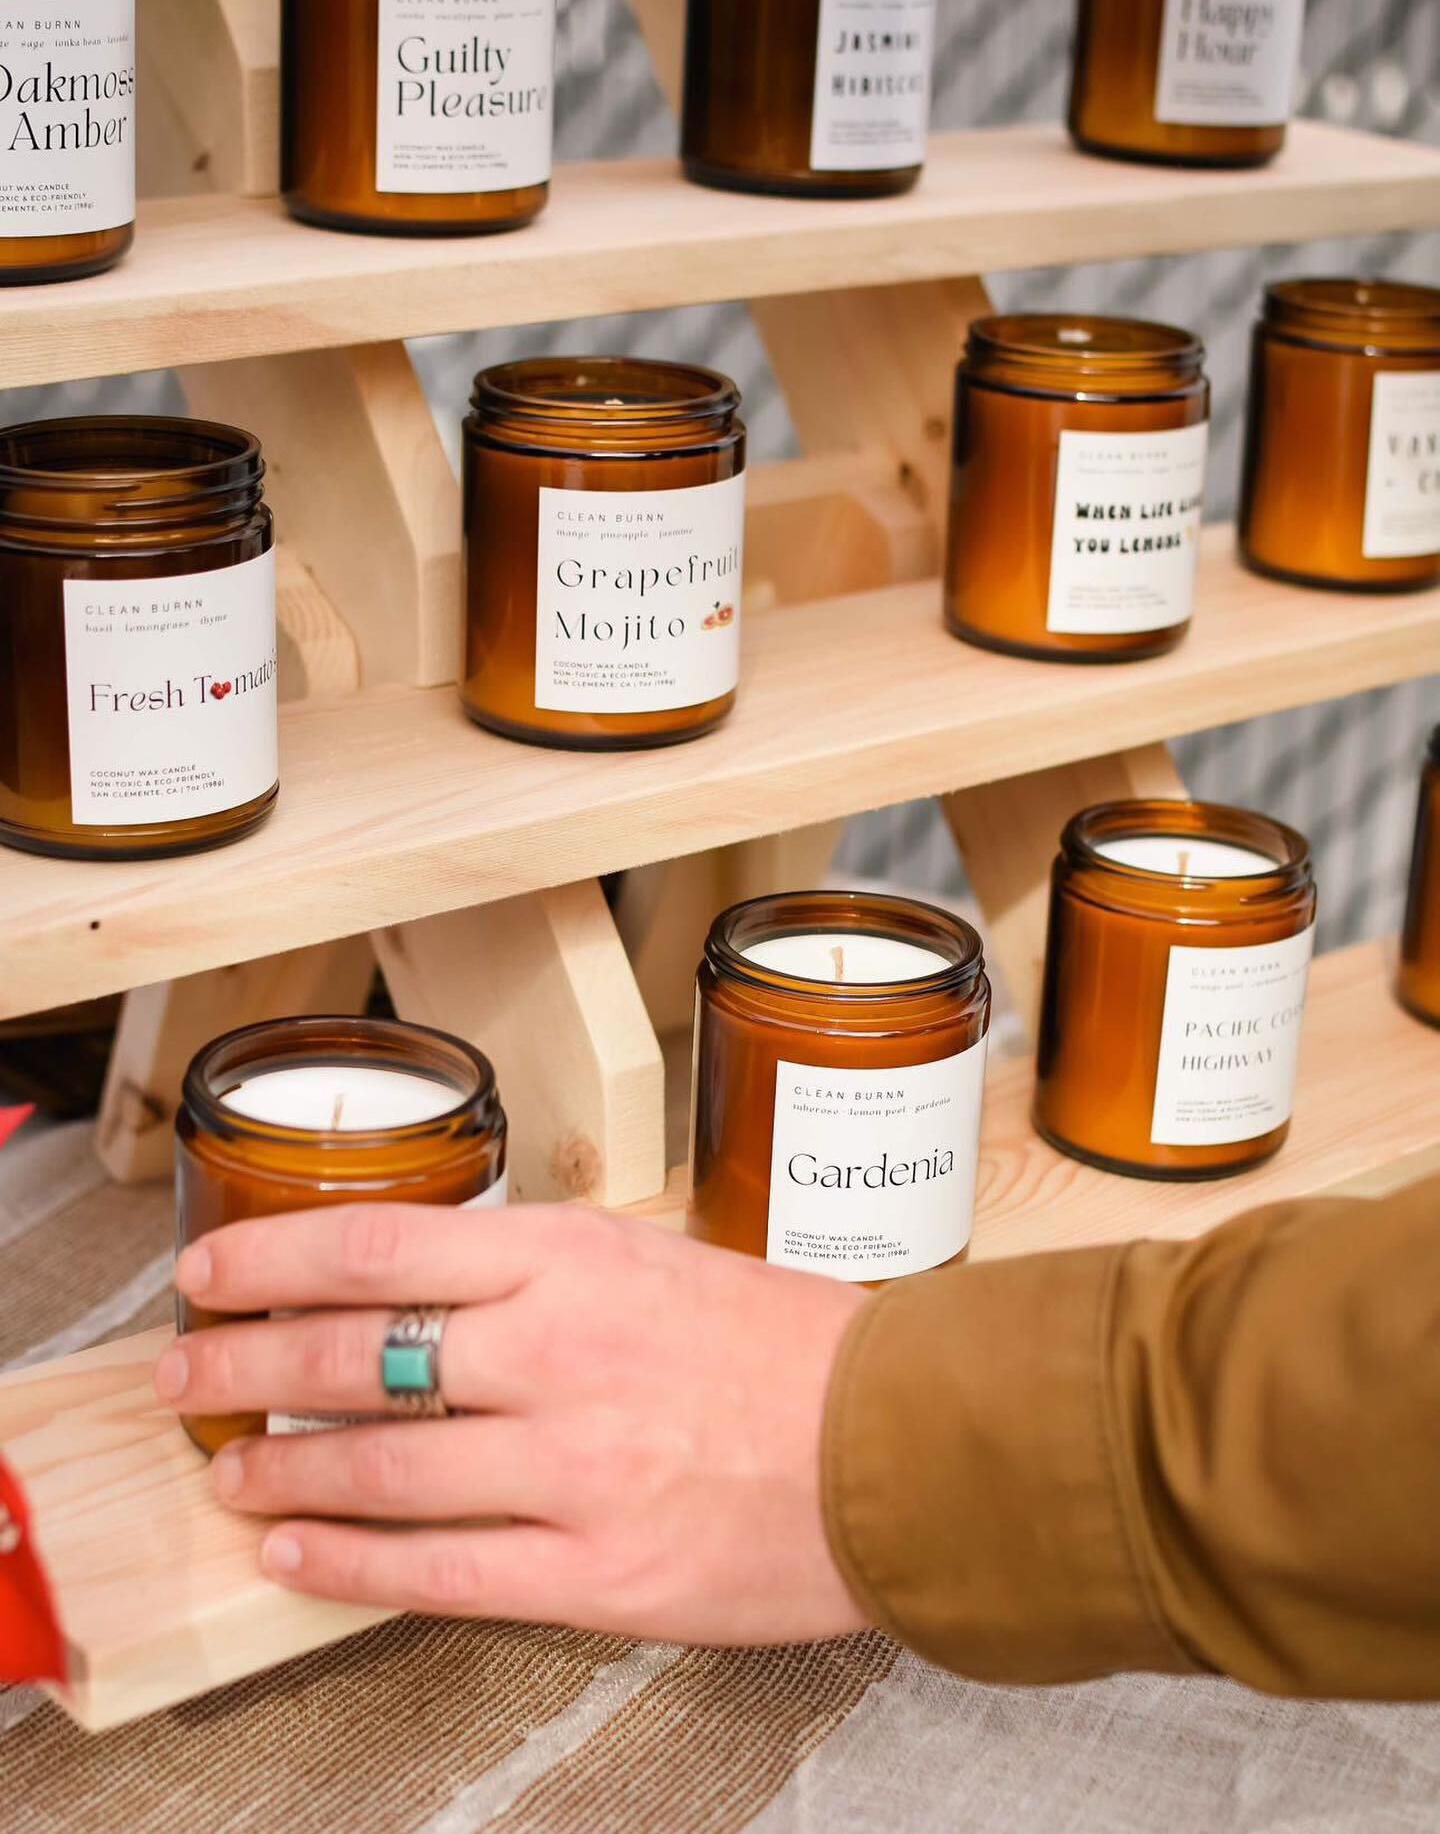 A light-skinned hand reaches for a single candle in a display of soy wax candles poured in amber glass jars with white labels. There are three rows of candles with their lids off on a natural wood riser.